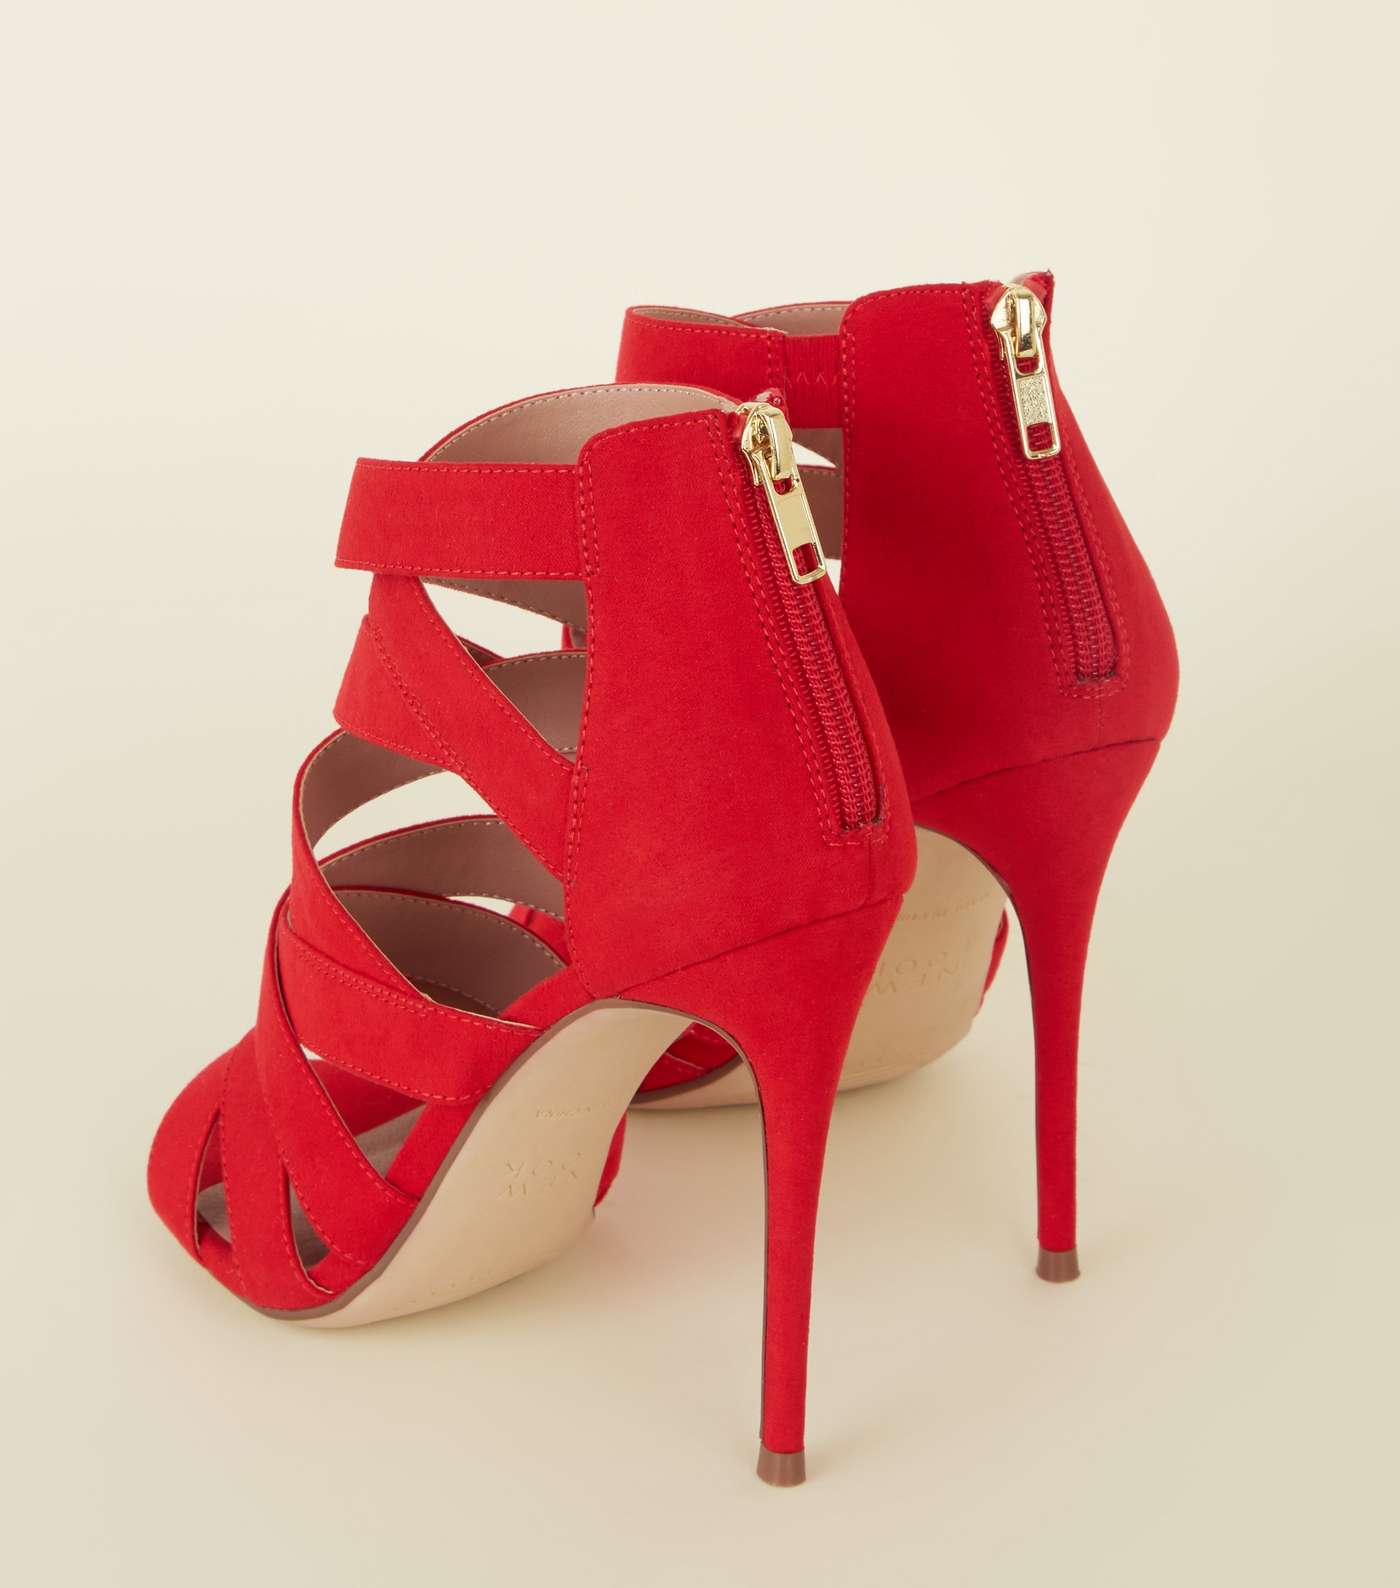 Red Strappy Suedette Stiletto Heel Shoes Image 4